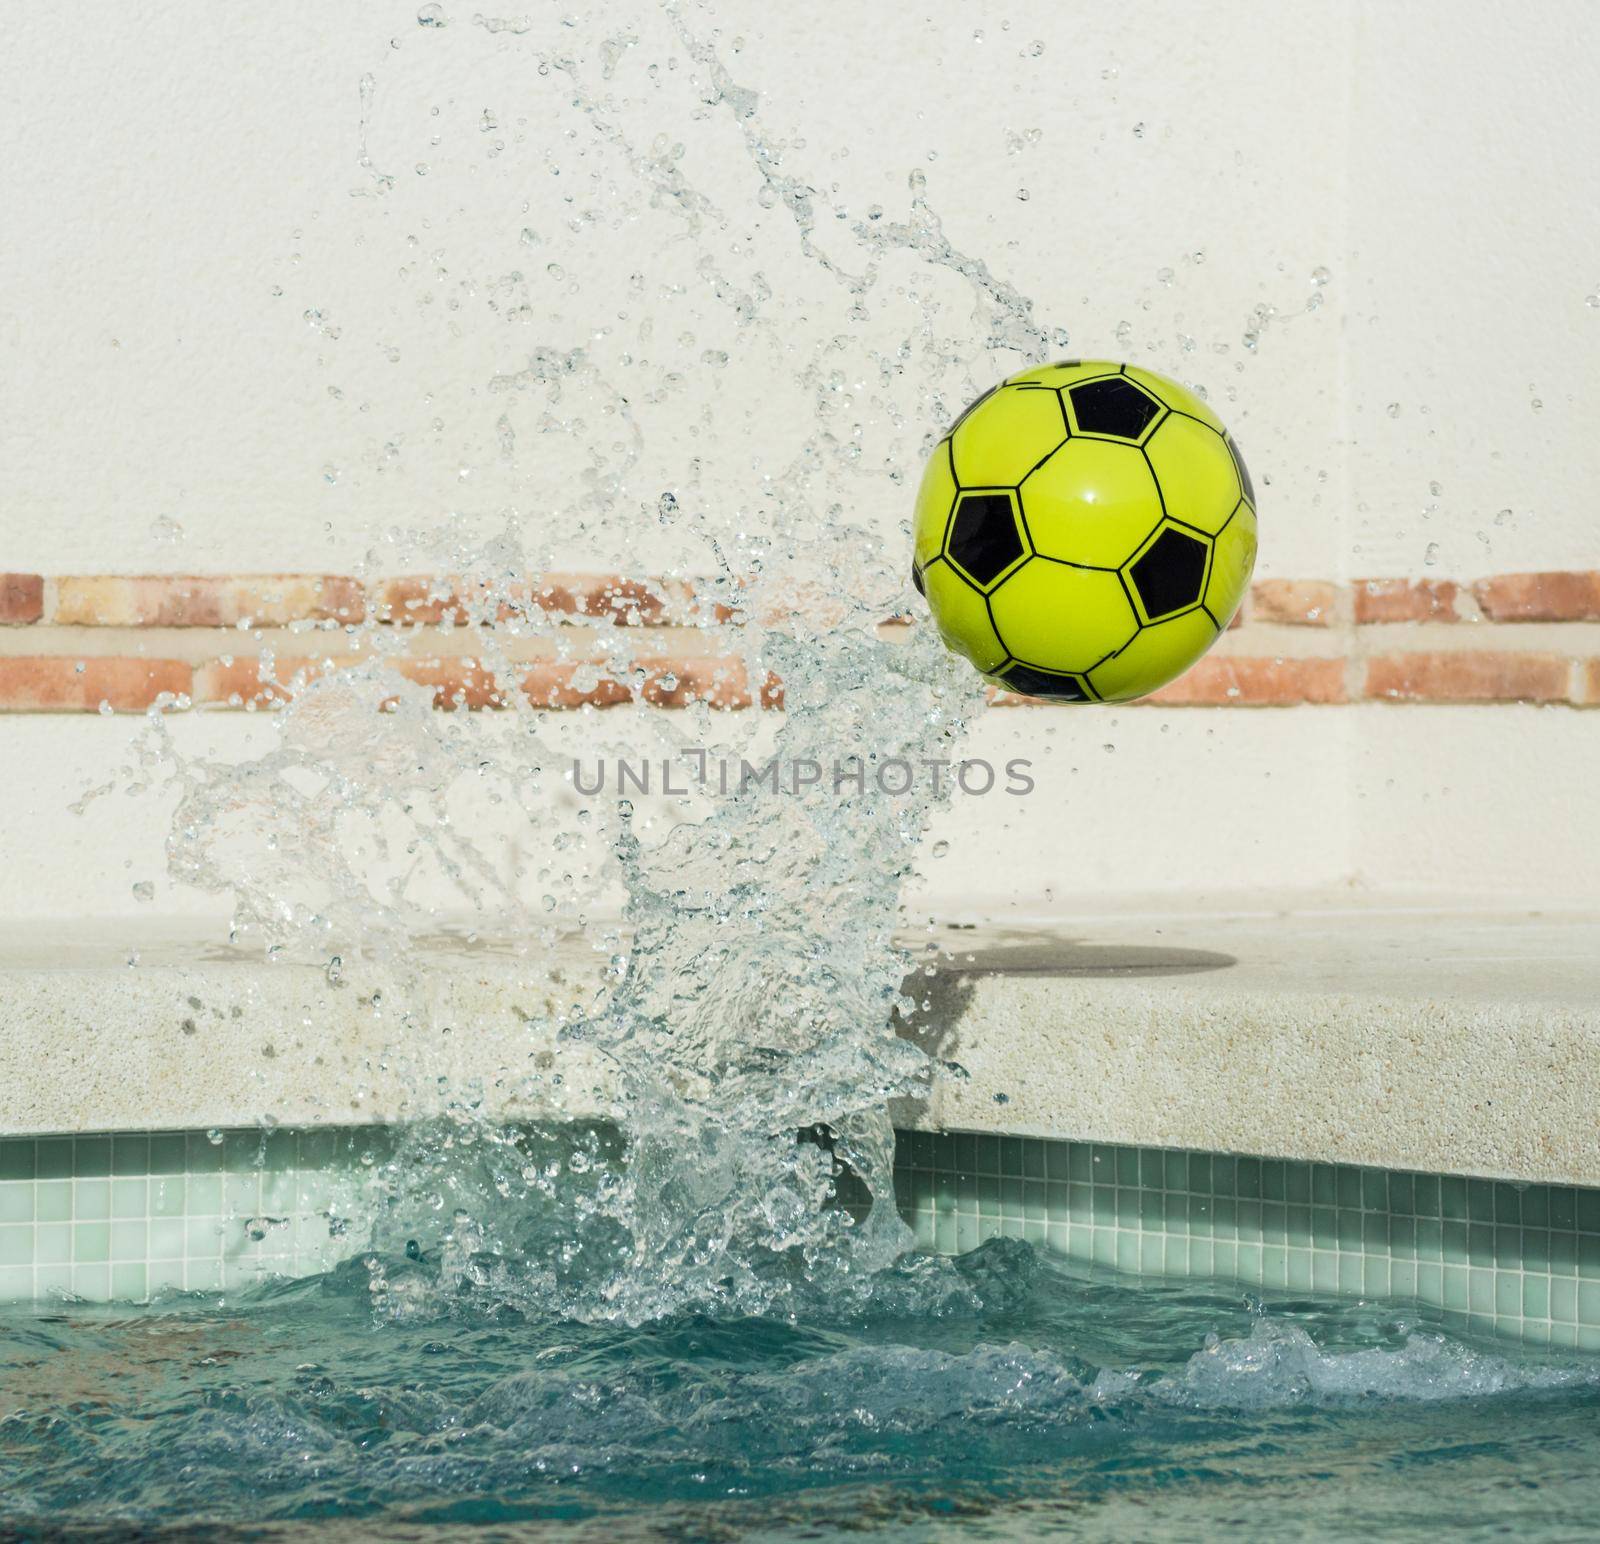 image of a yellow and black plastic ball popping out of the water at high speed with splashing water at high speed